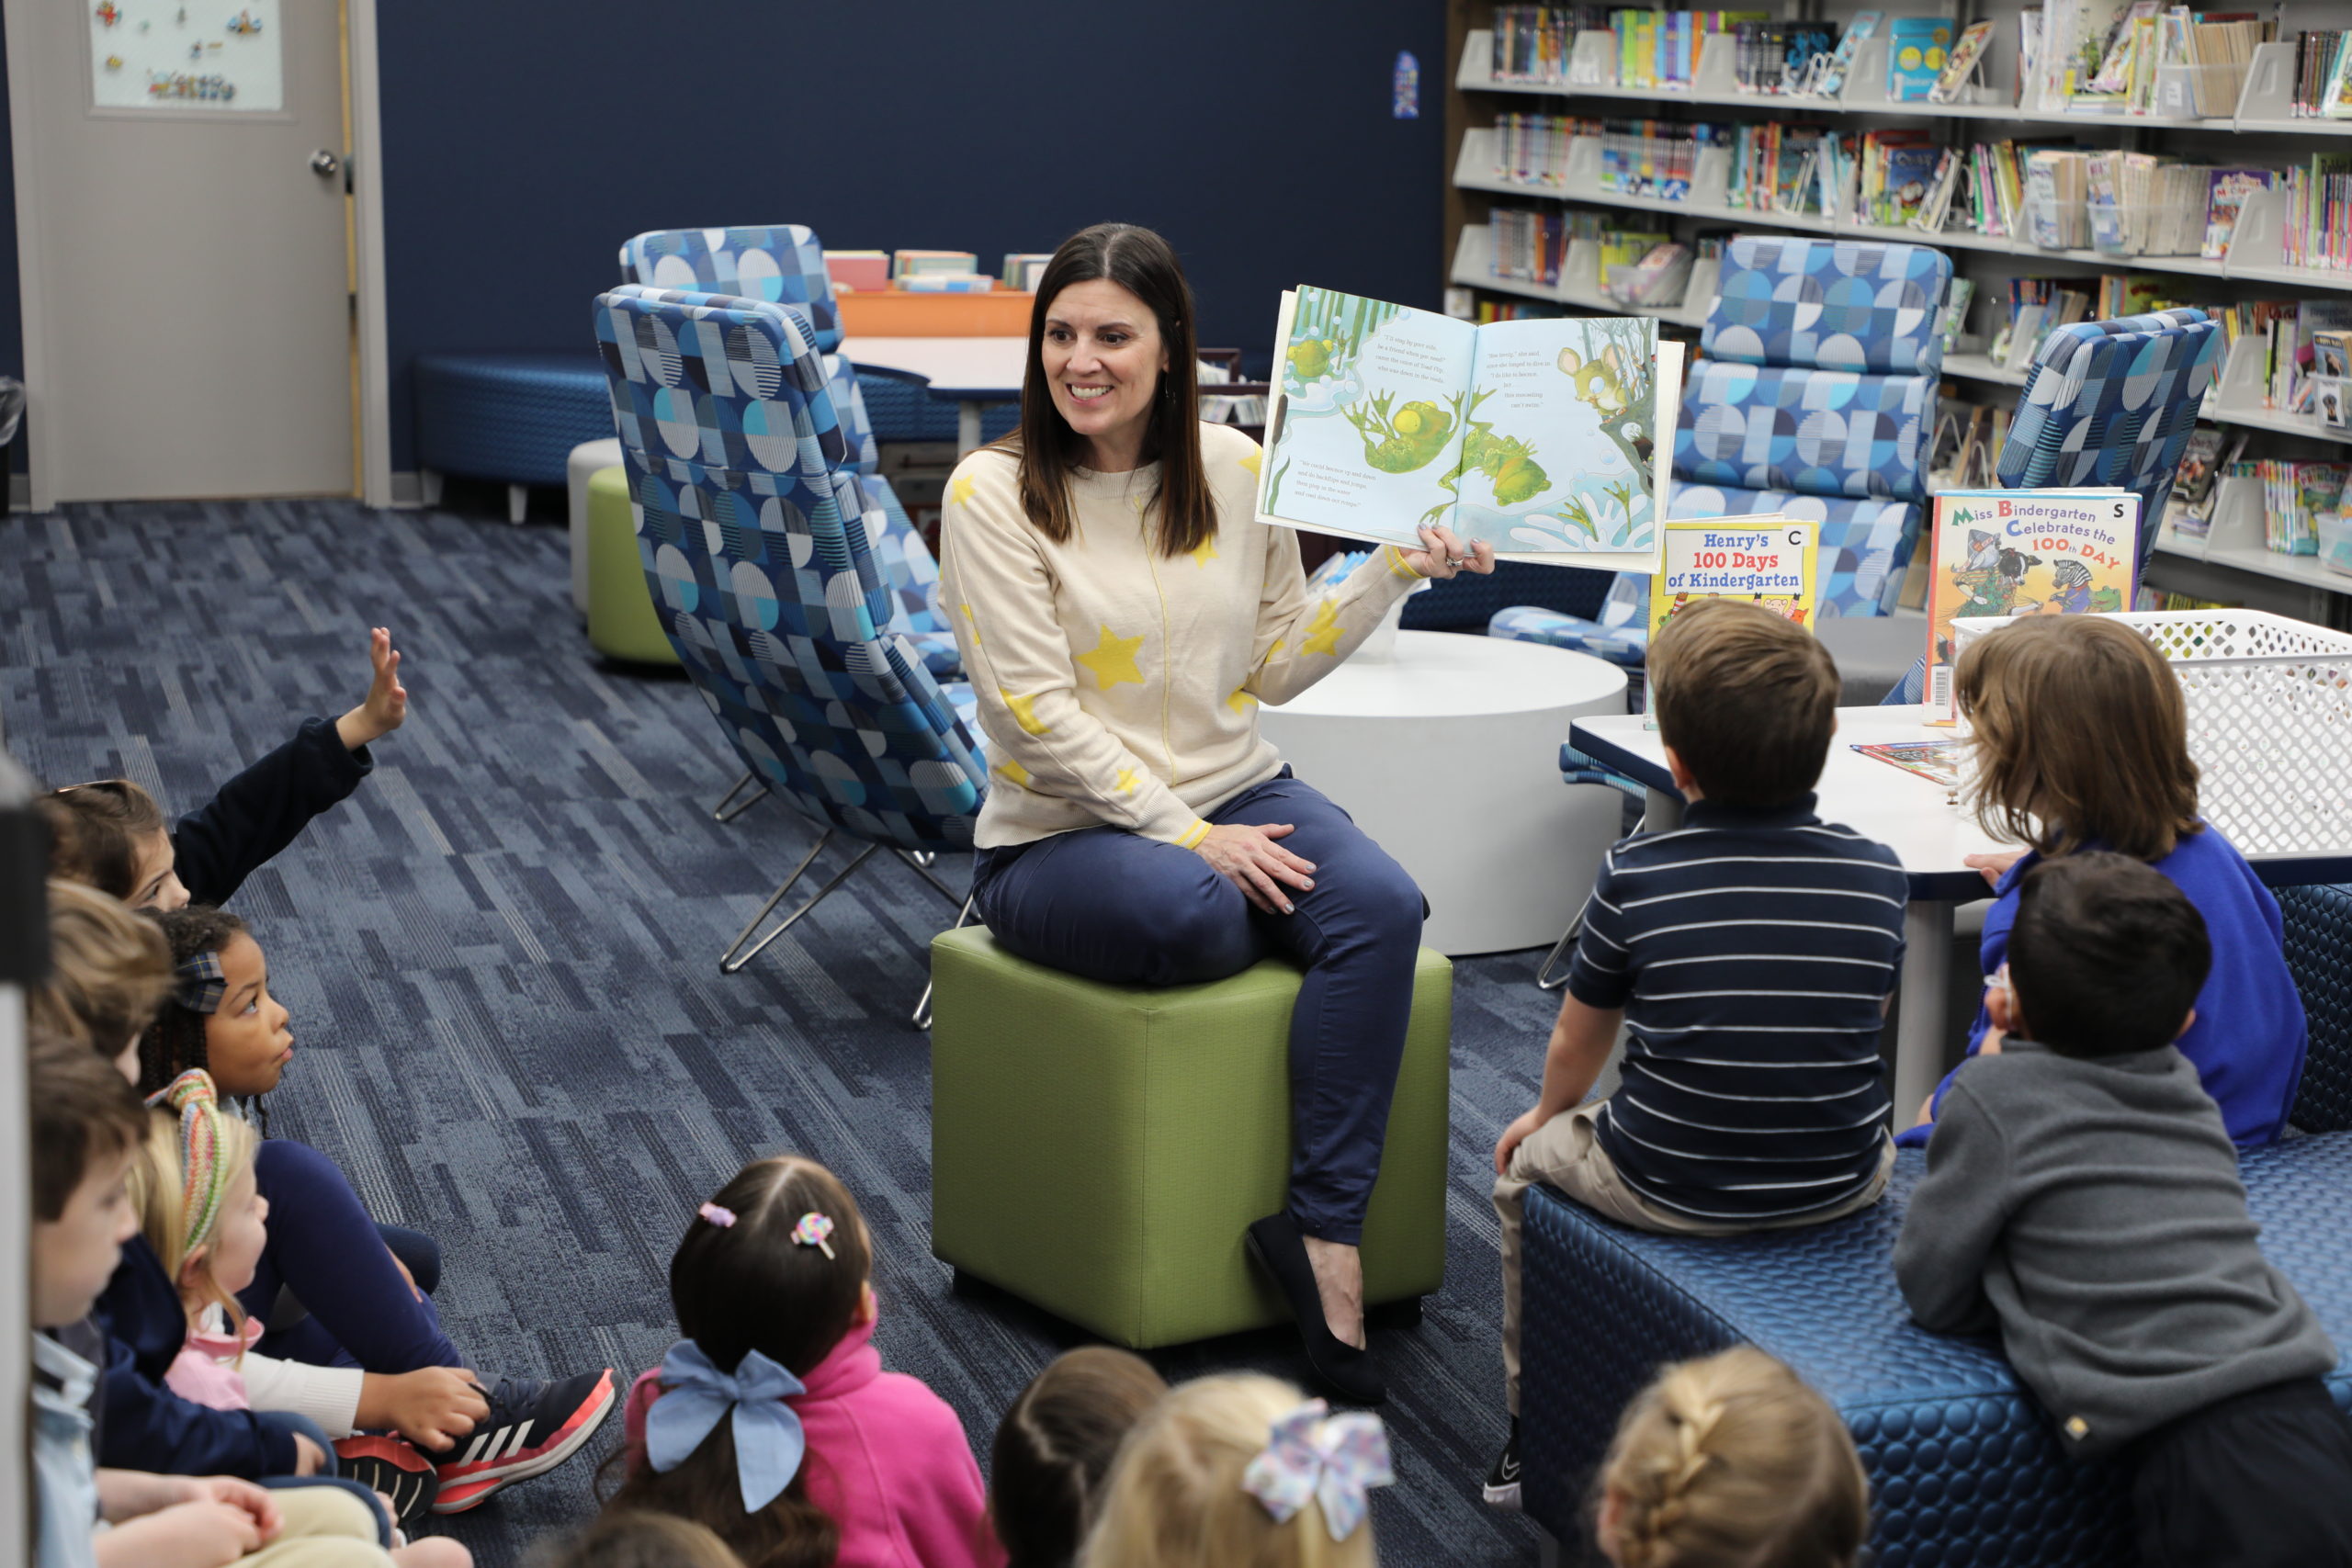 Lower School Librarian Cathy Zeller reads to a group of kindergarten students.